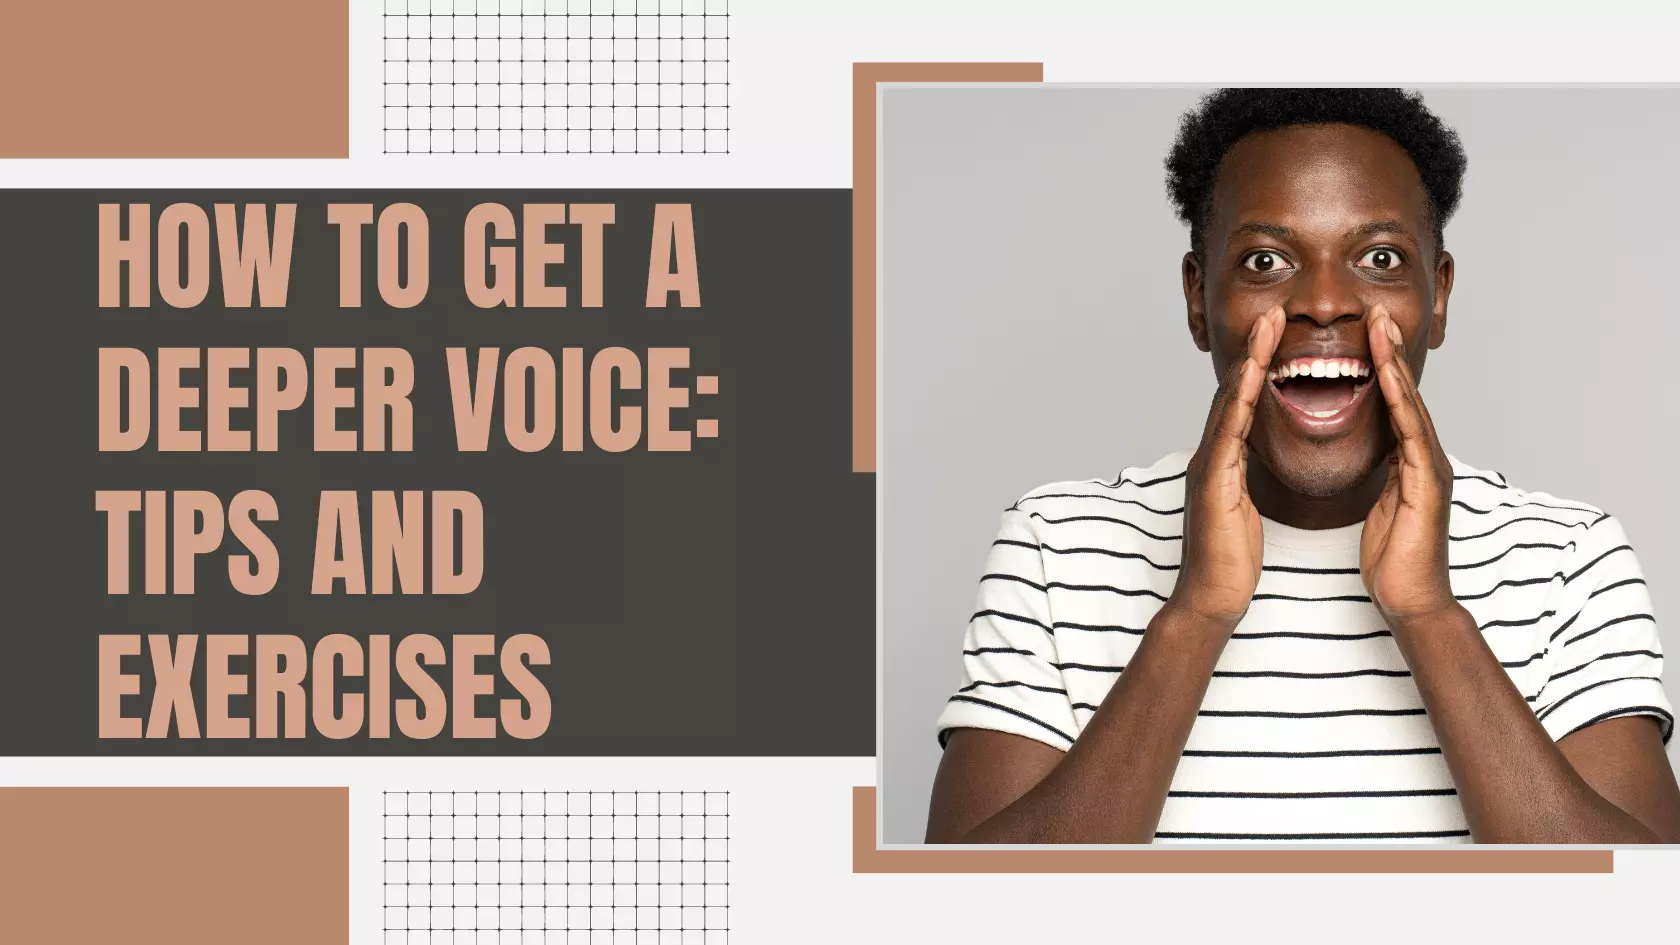 How to Get a Deeper Voice: Tips and Exercises